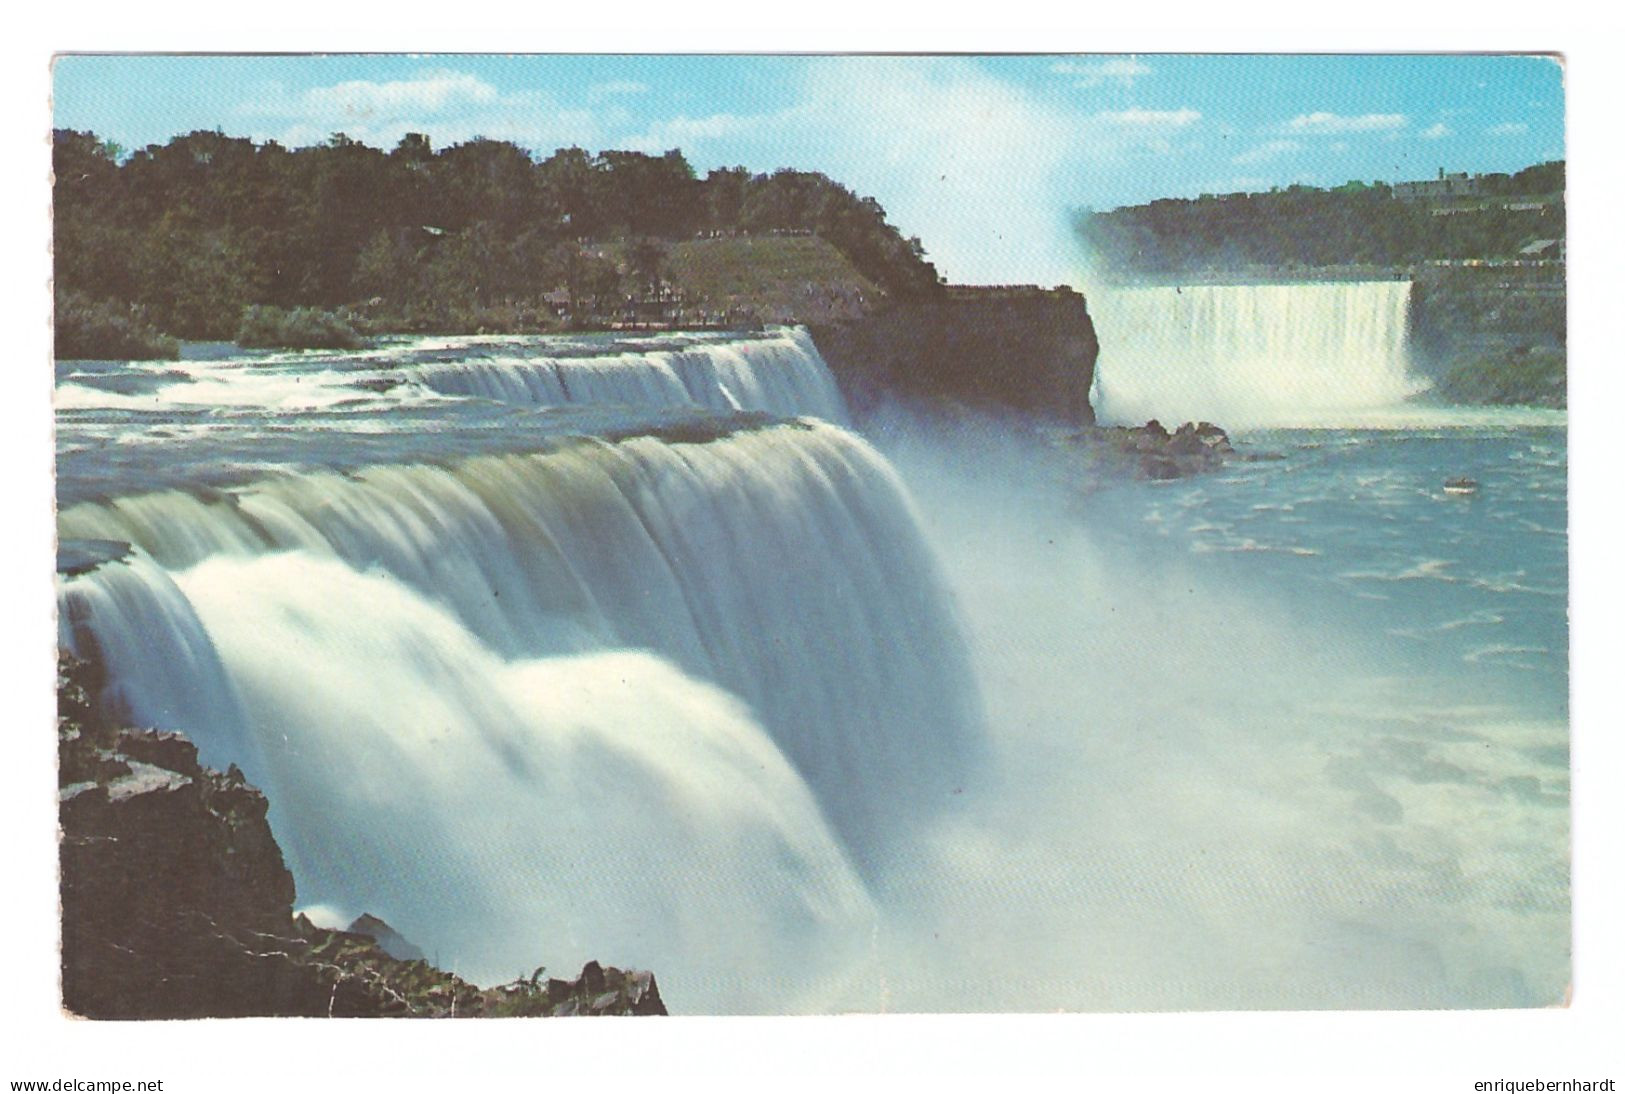 CANADA // NIAGARA FALLS // AMERICAN FALLS AT PROSPECT POINT AND HORSESHOE FALL IN THE DISTANCE - Moderne Ansichtskarten